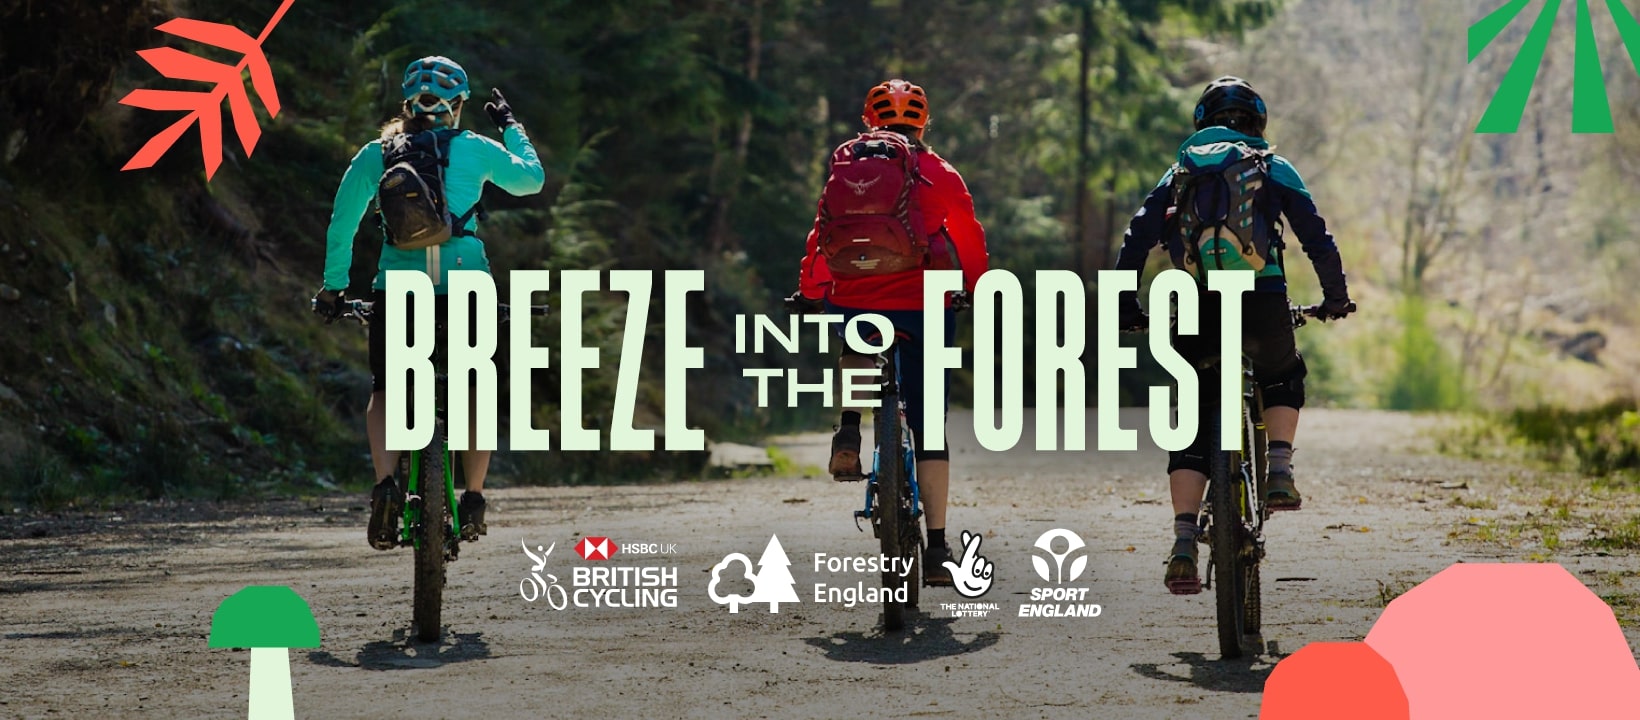 Breeze into the Forest for e-bikes - Gorse Trail | Forestry England